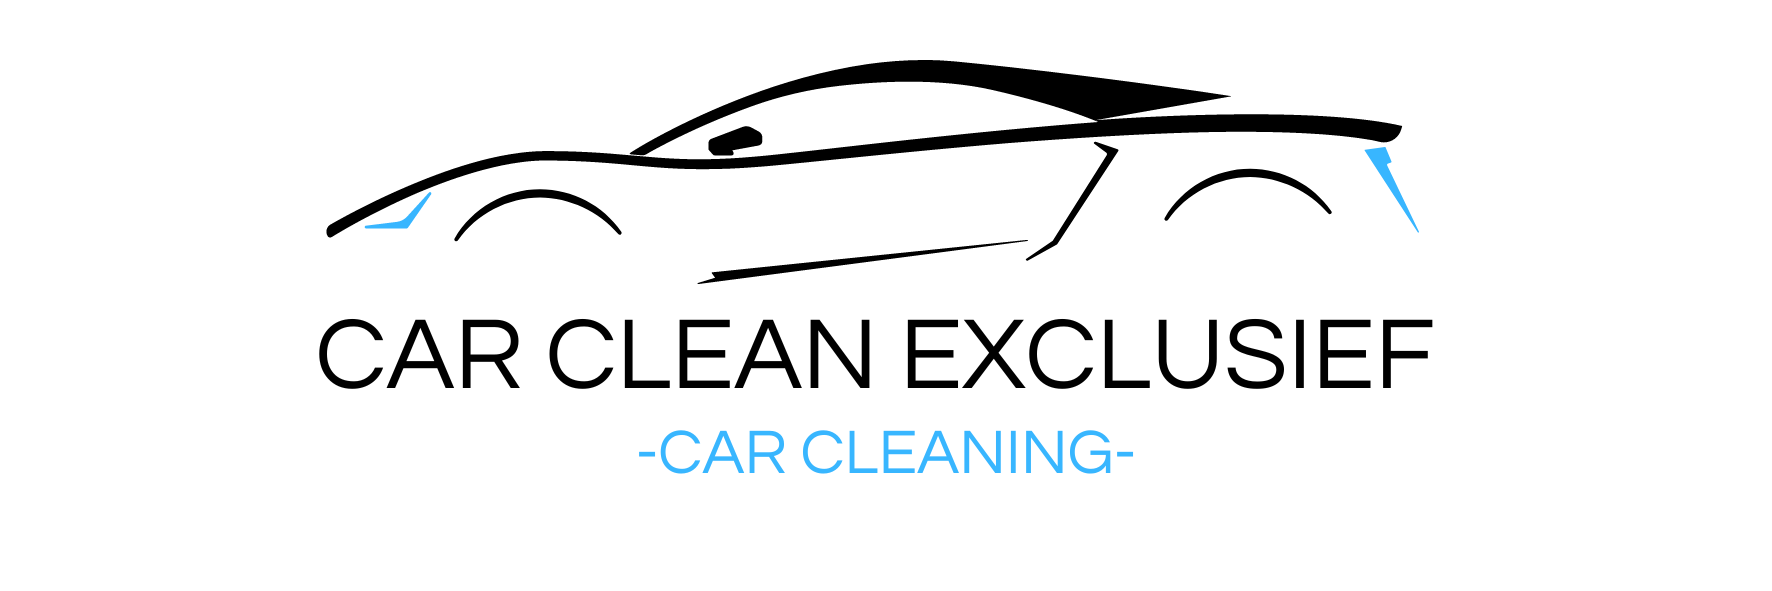 CarCleanExclusief